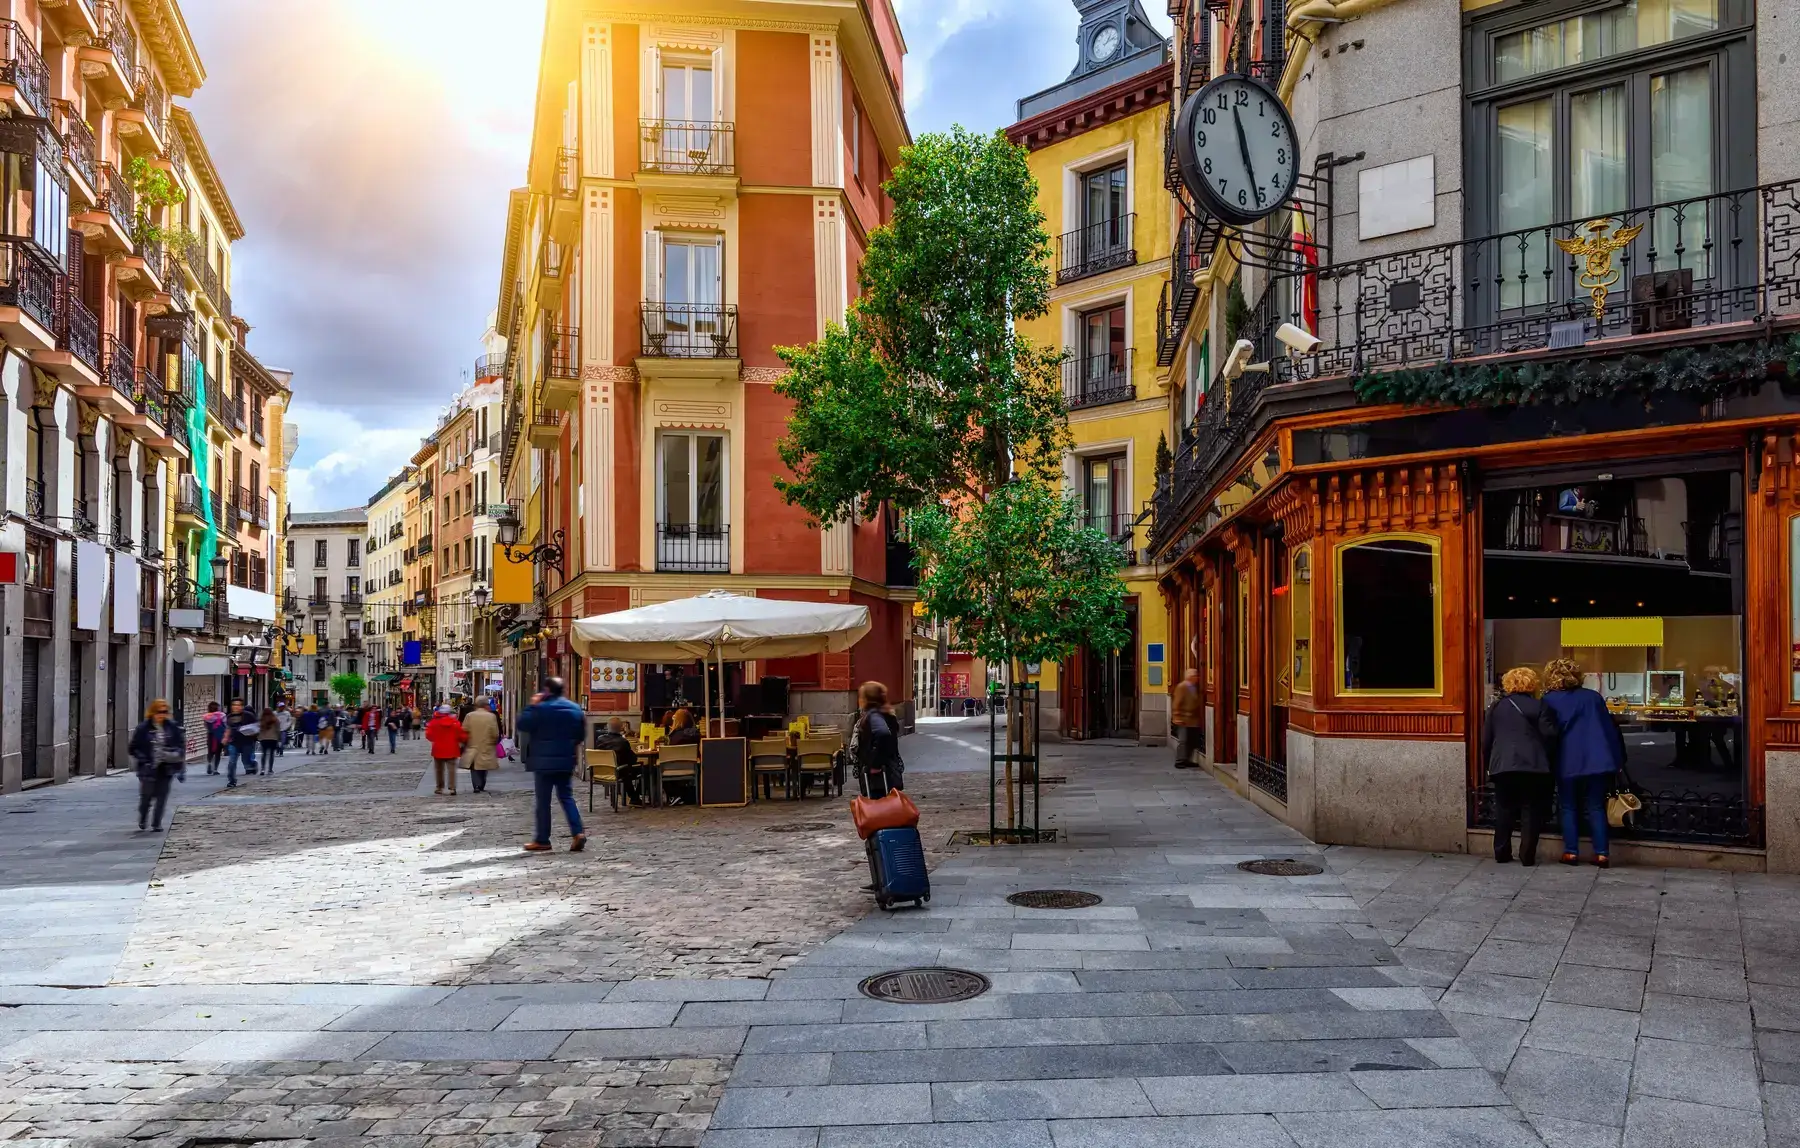 Hotels in Madrid are waiting for you to discover the city's beauty! Find the best deals here!